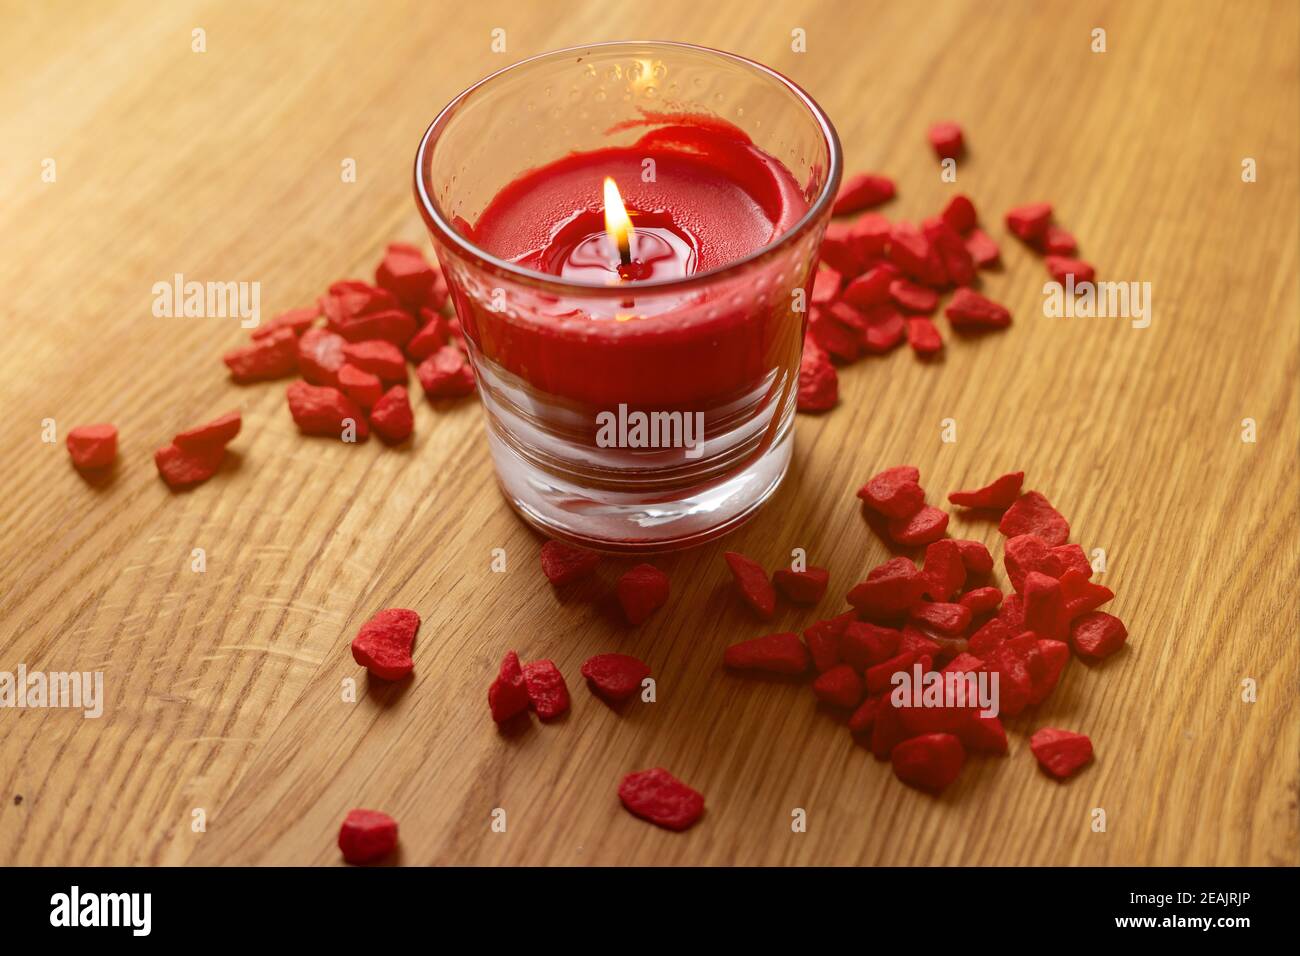 welness composition. red candle in glass on wooden table with red stones Stock Photo